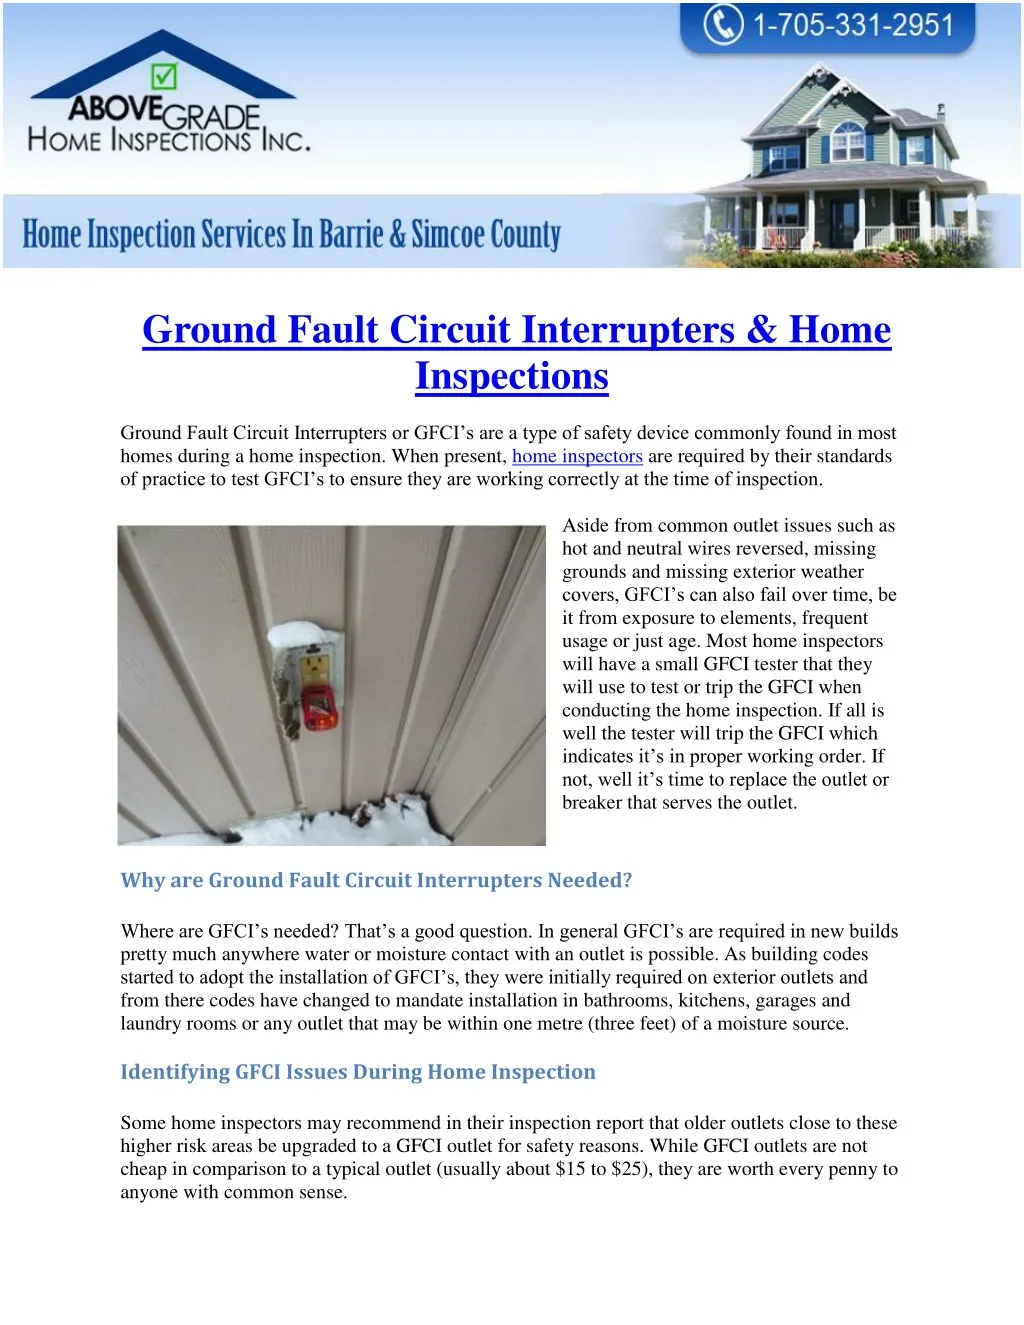 ground fault circuit interrupters home inspections